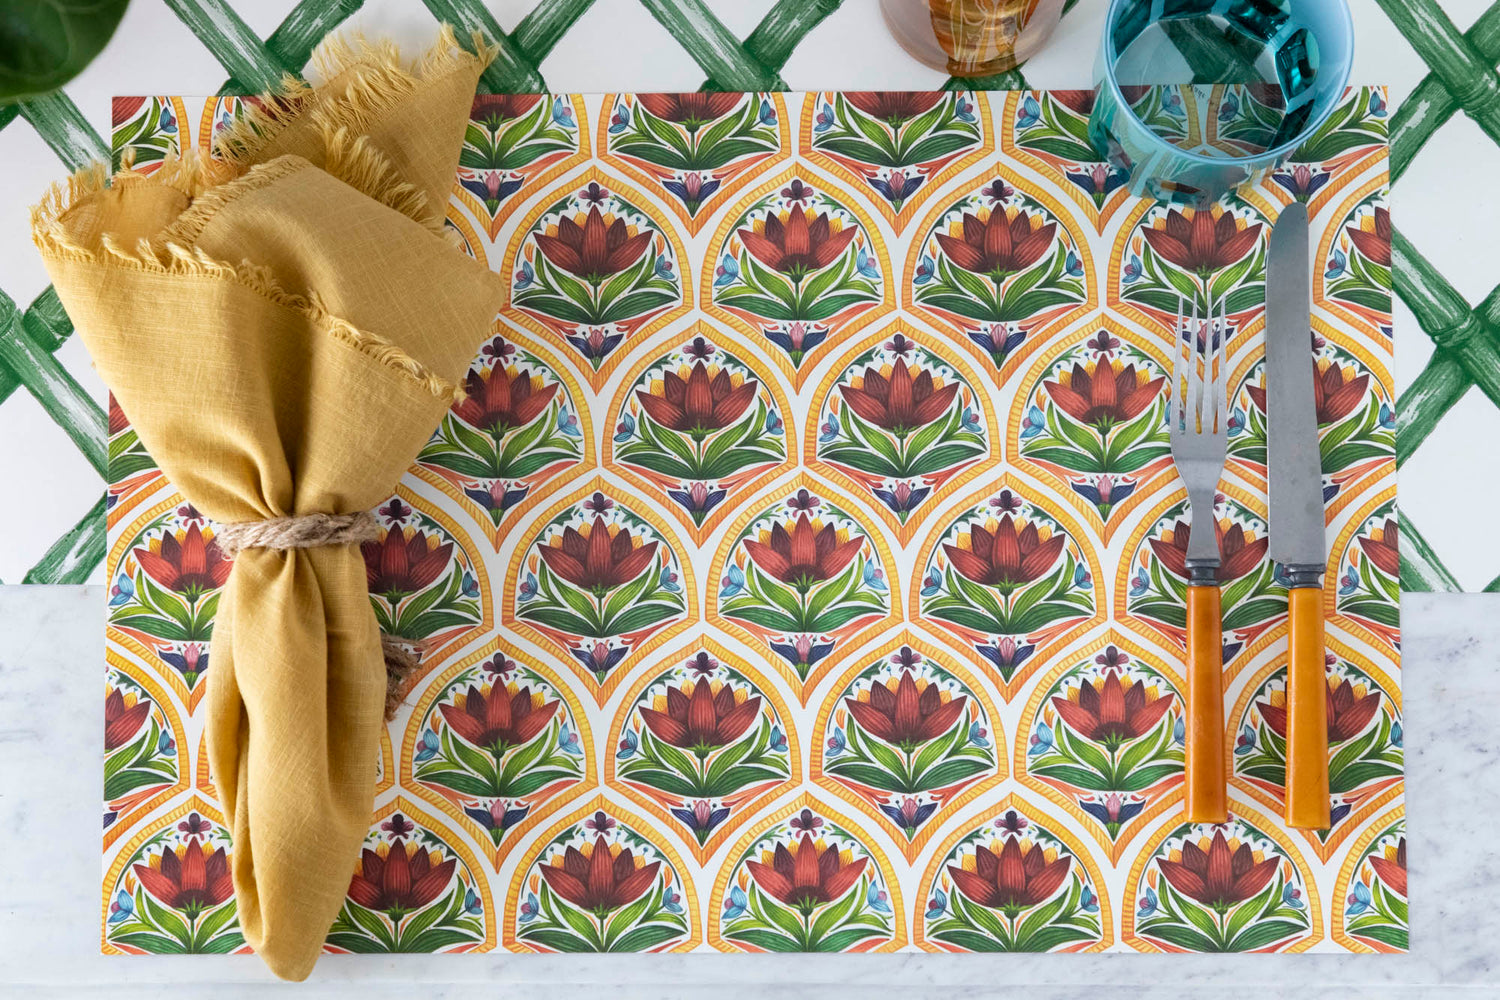 The Fiesta Floral Tile Placemat used in a festive place setting sans plate, from above.